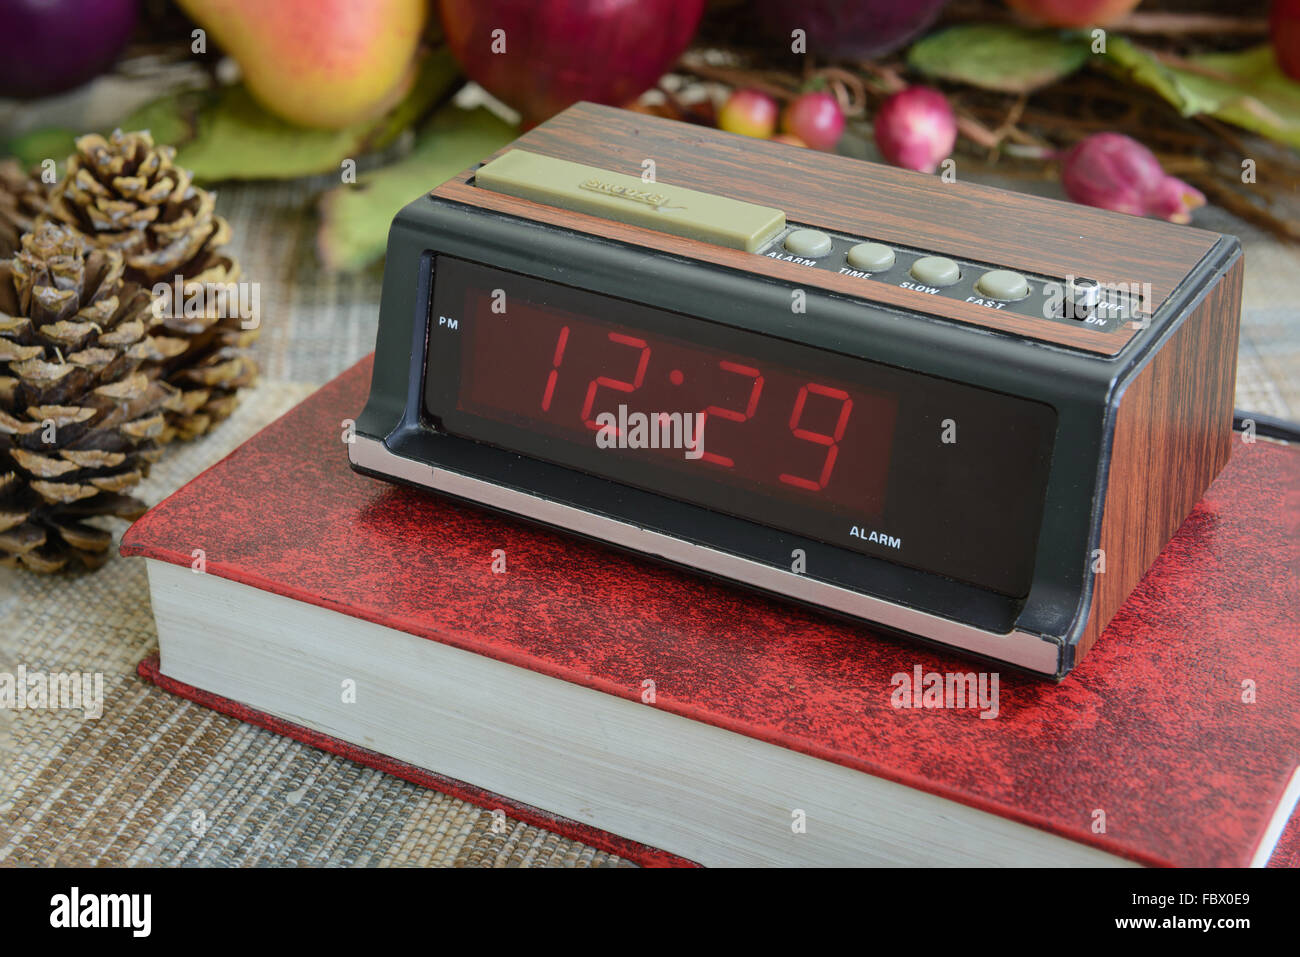 old digital alarm clock, grunge and old condition, wood paint Stock Photo